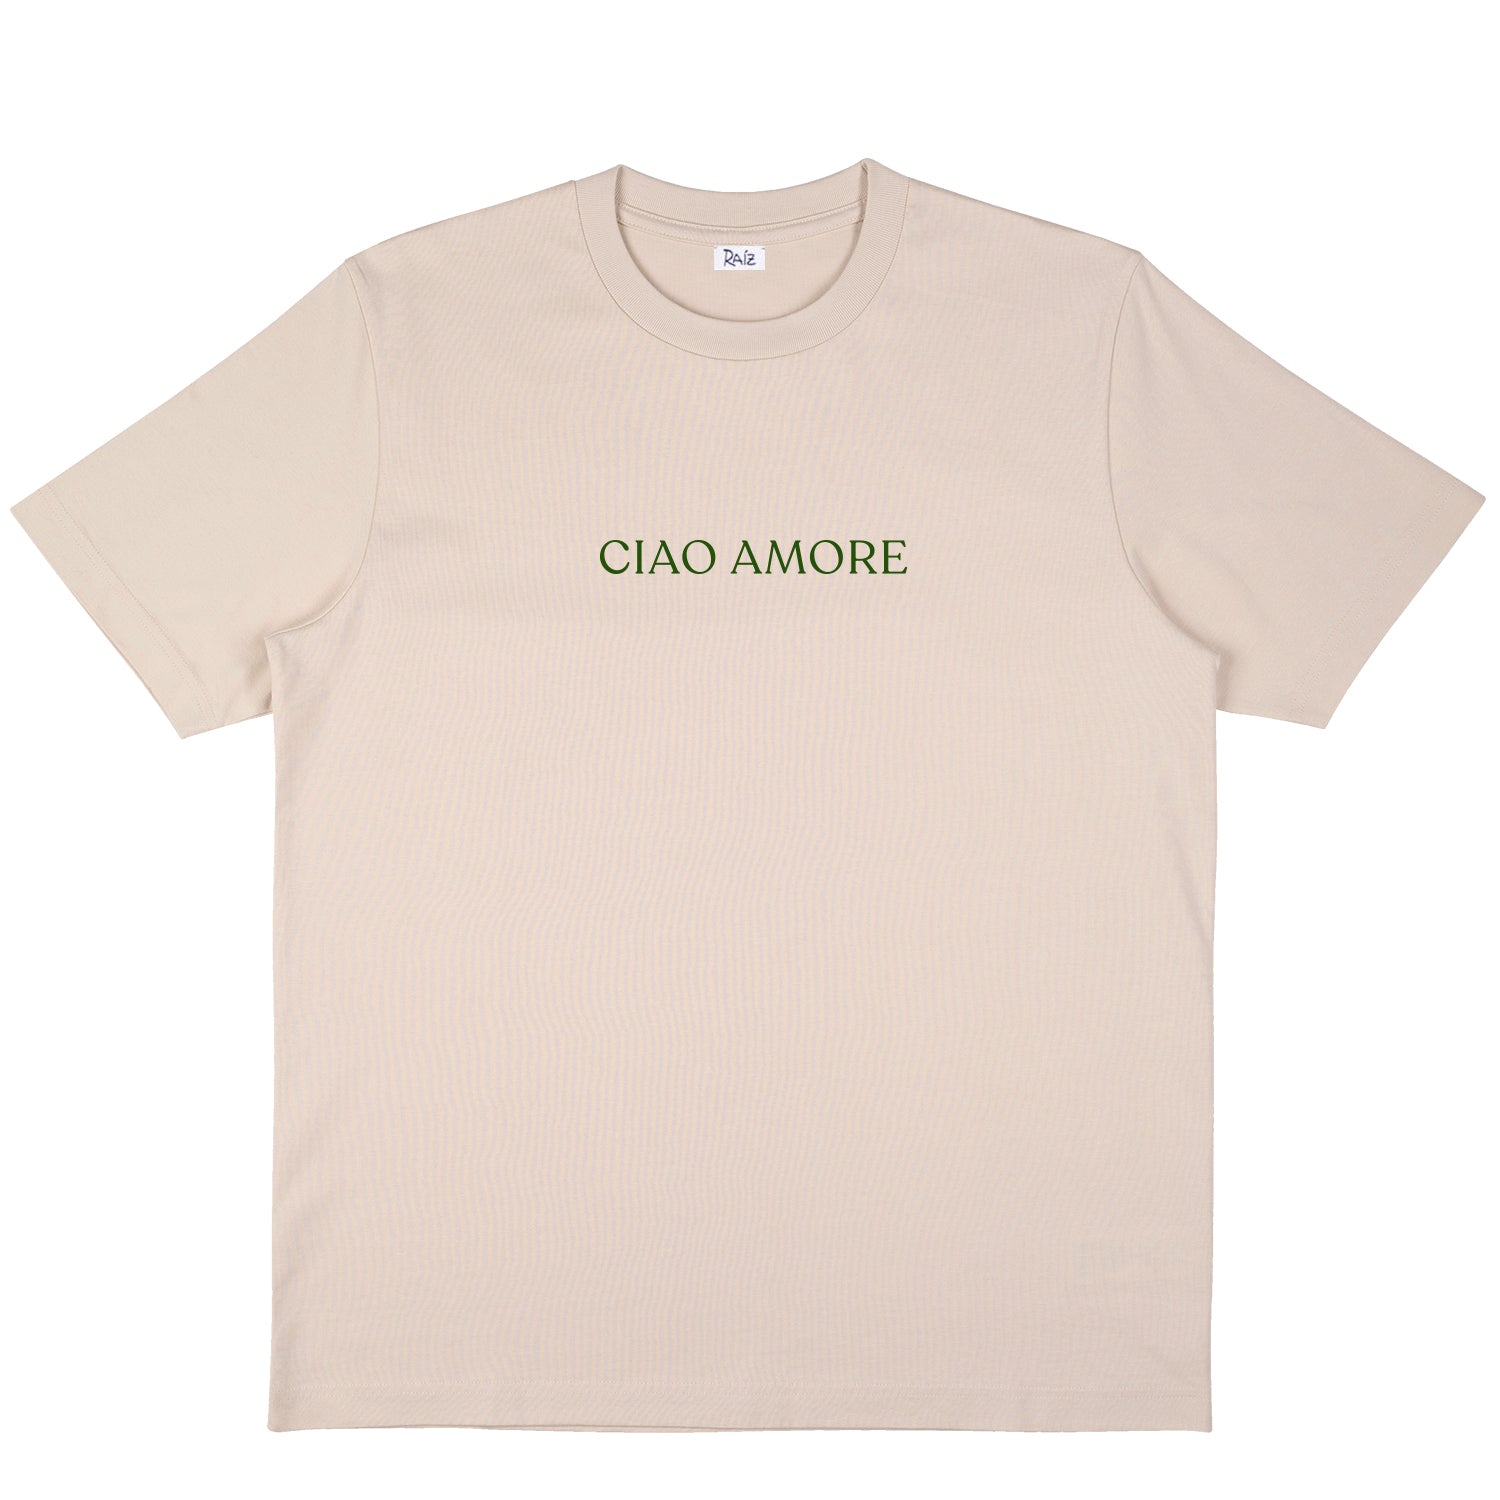 CIAO AMORE T-SHIRT